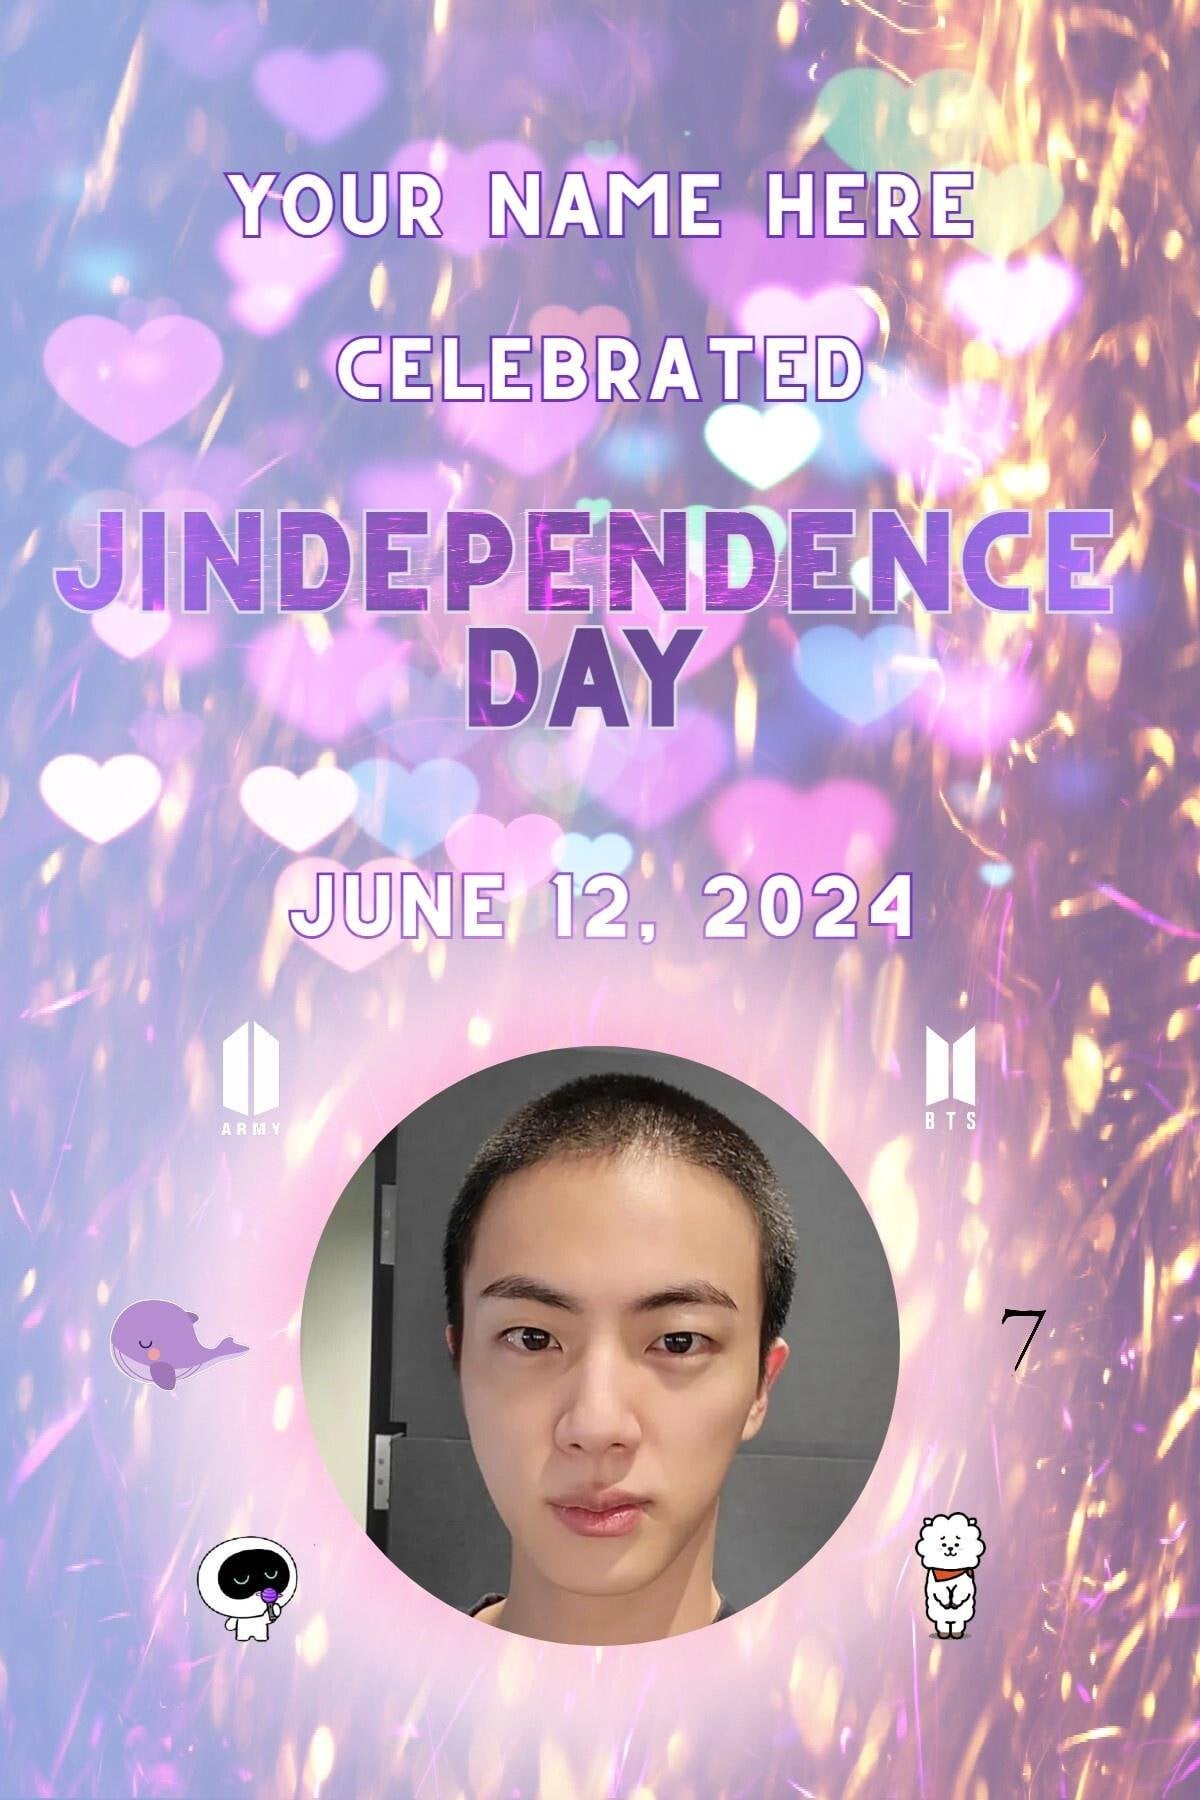 [GIVEAWAY] "JINDEPENDENCE DAY" Commemorative Postcard - With Your Name On It! (WW)